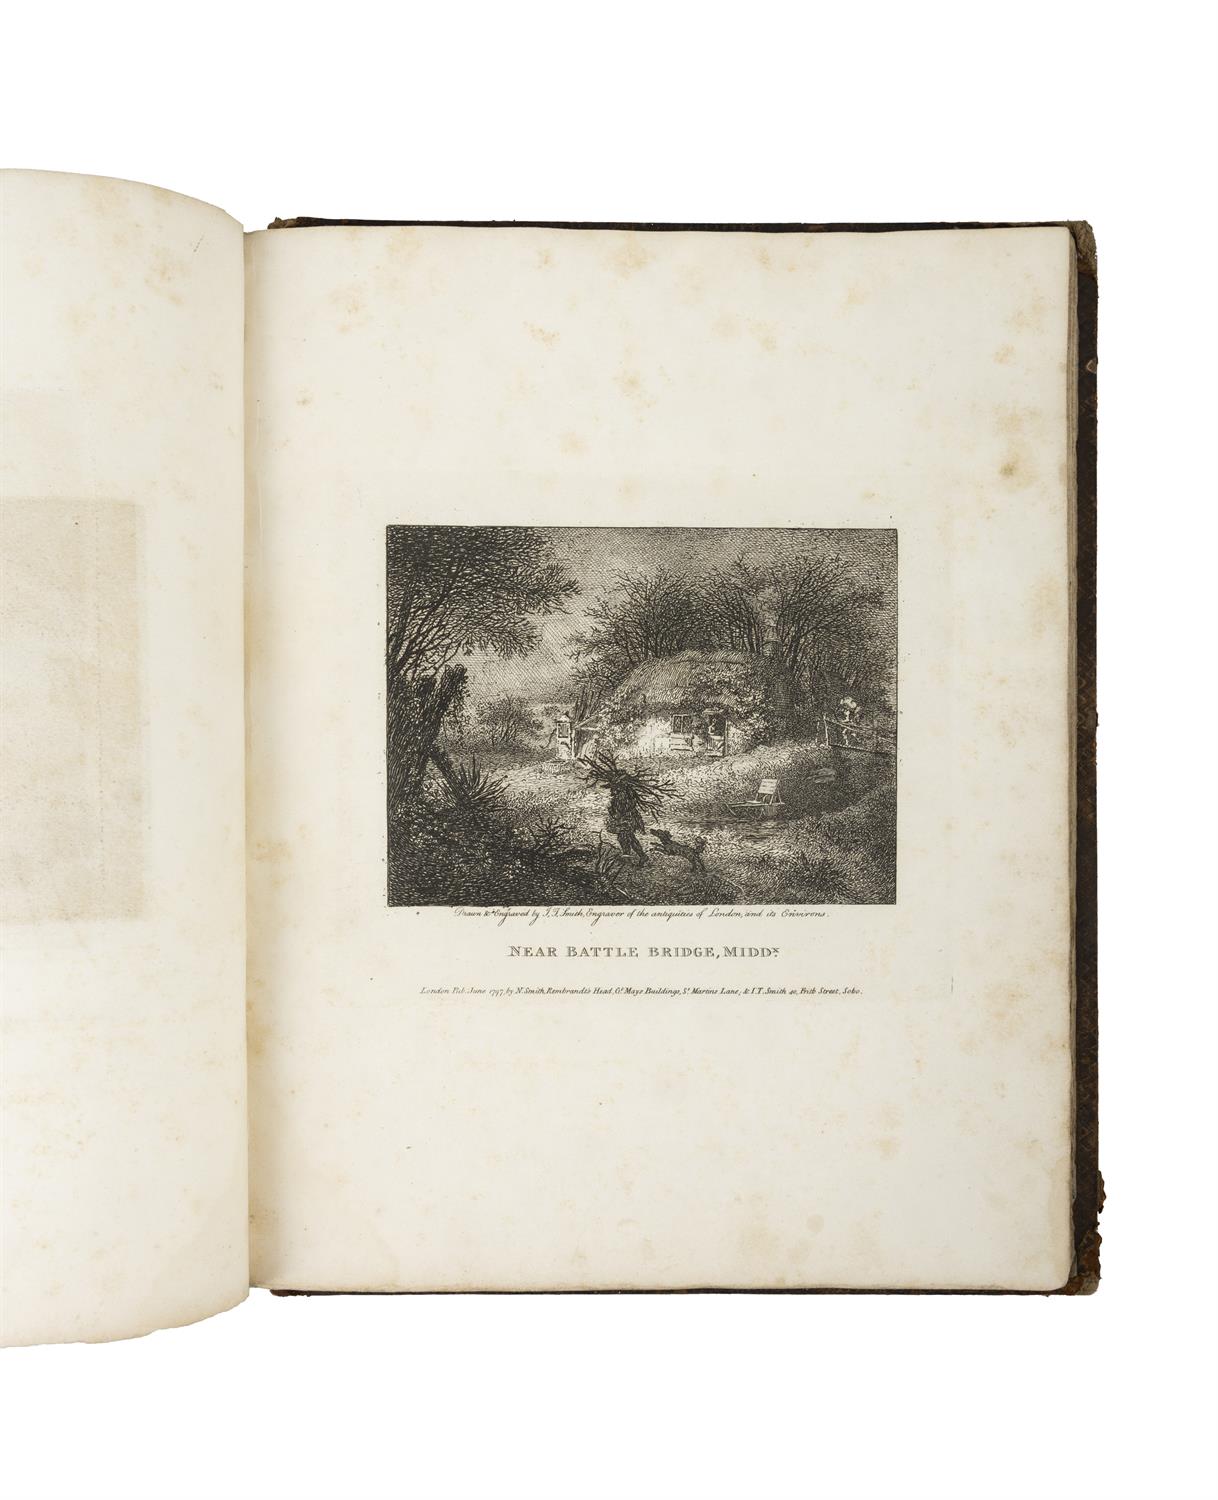 SMITH, John Thomas [1766-1833]: Remarks on Rural Scenery, Printed for, and sold by Nathaniel - Image 5 of 6